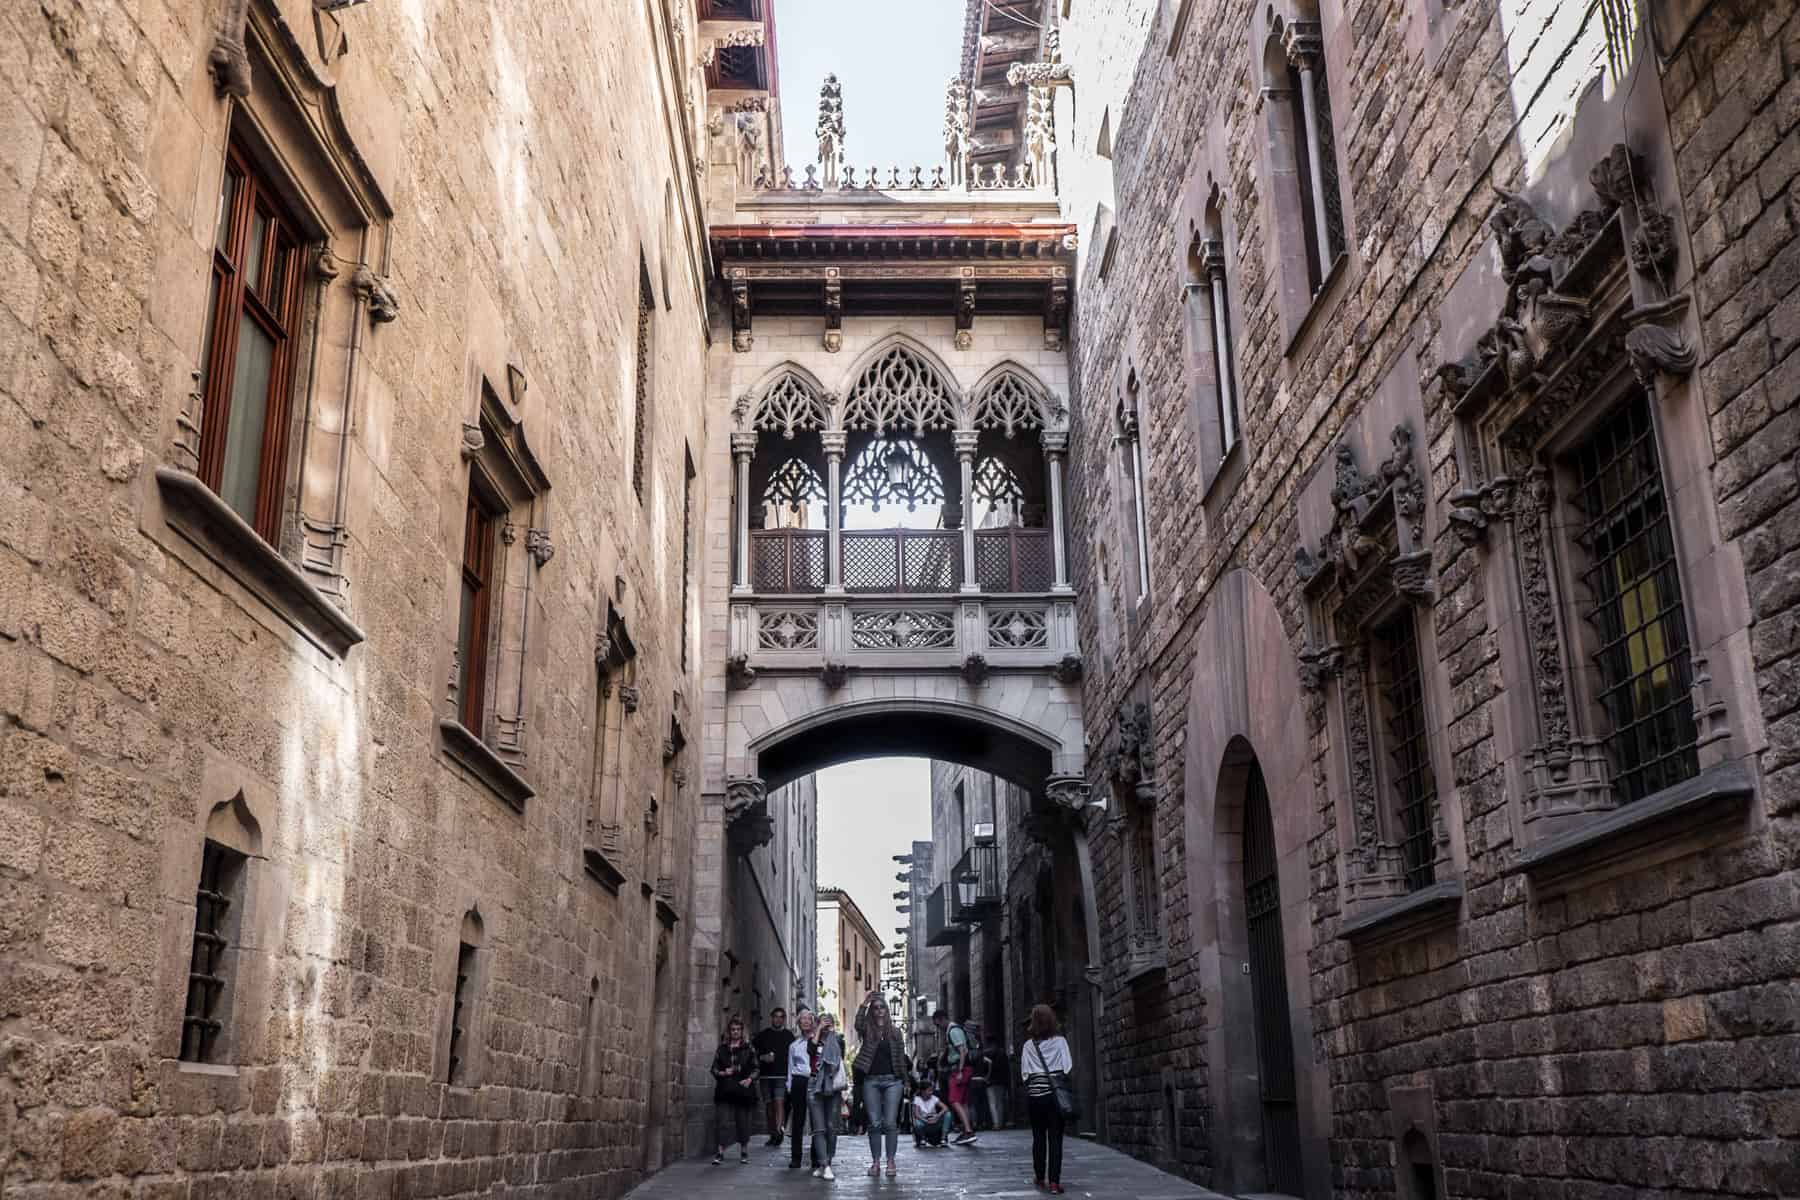 A narrow, delicately carved balcony connects two old golden and brown stone buildings on a long street in Barcelona. People are walking underneath the structure. 